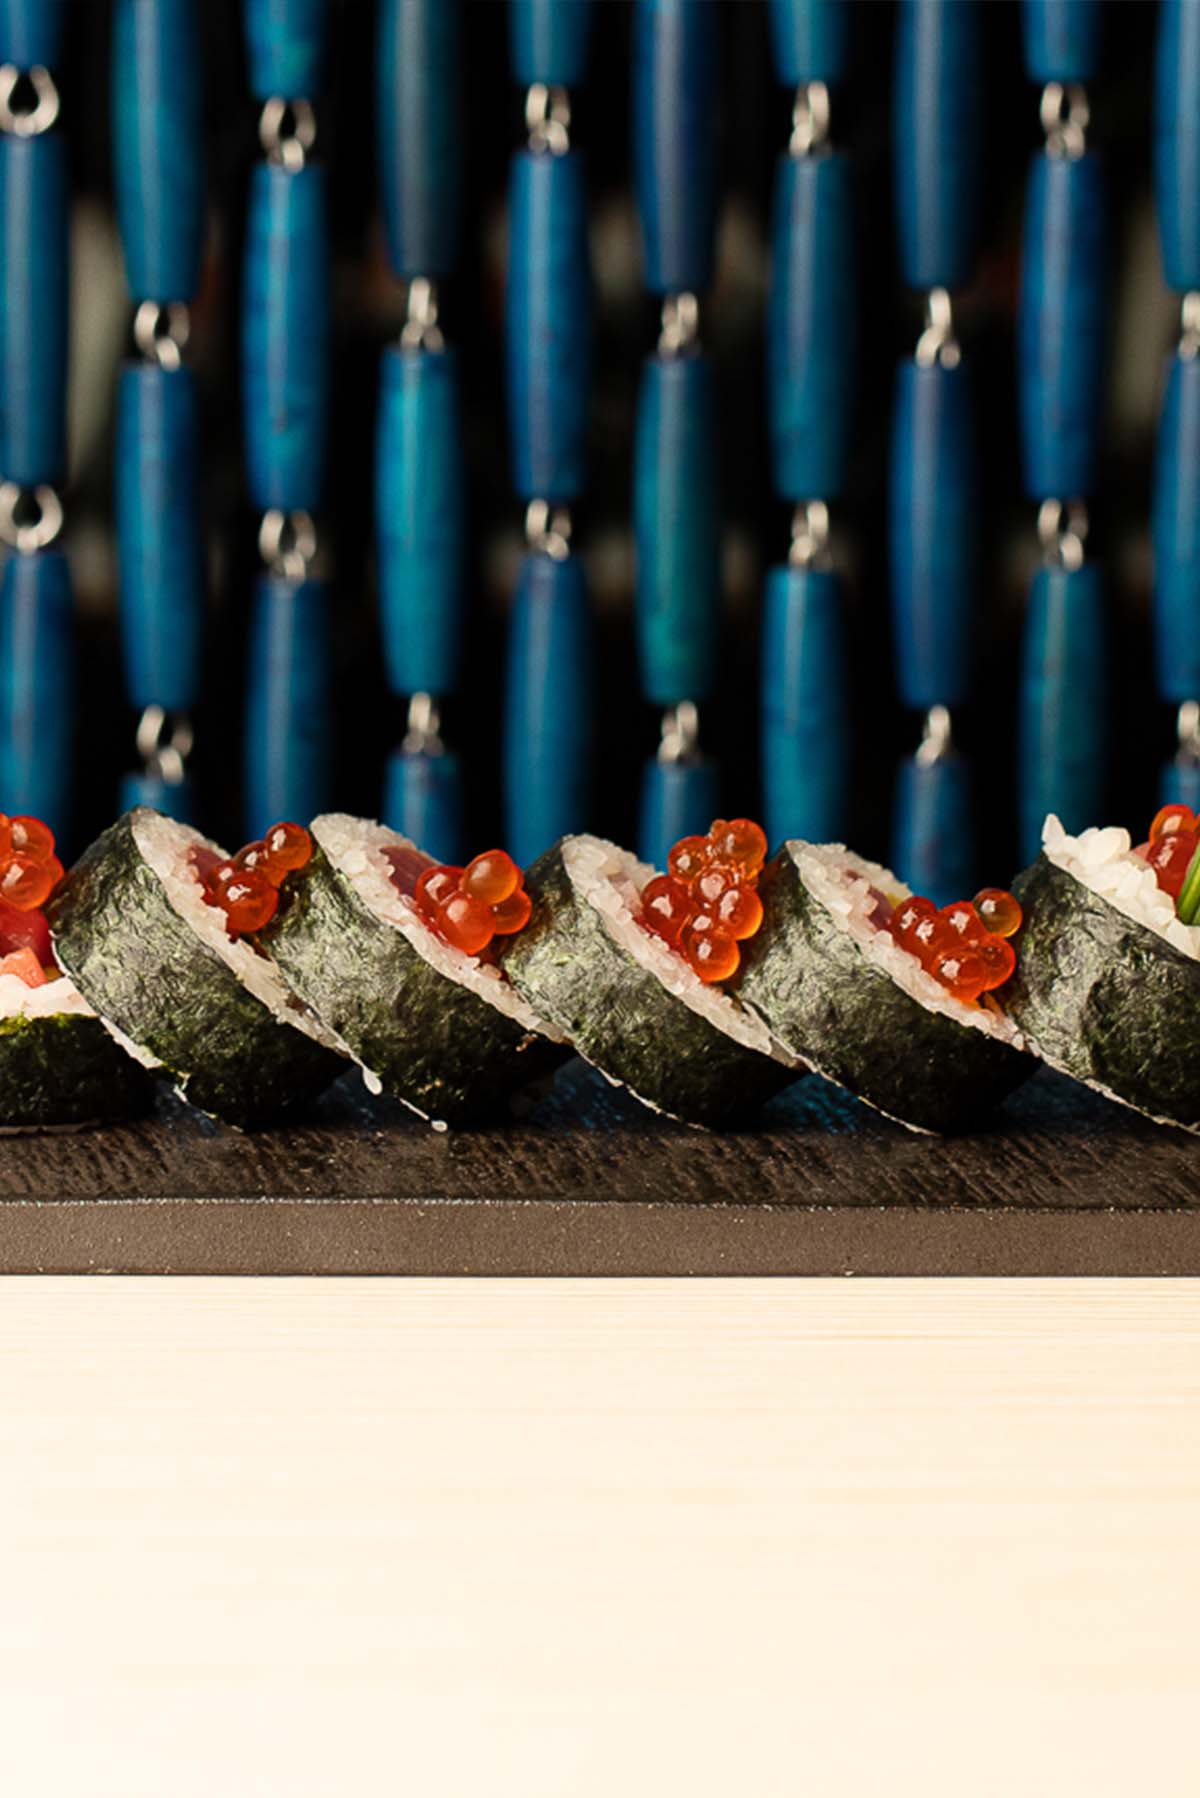 Plated signature hand roll